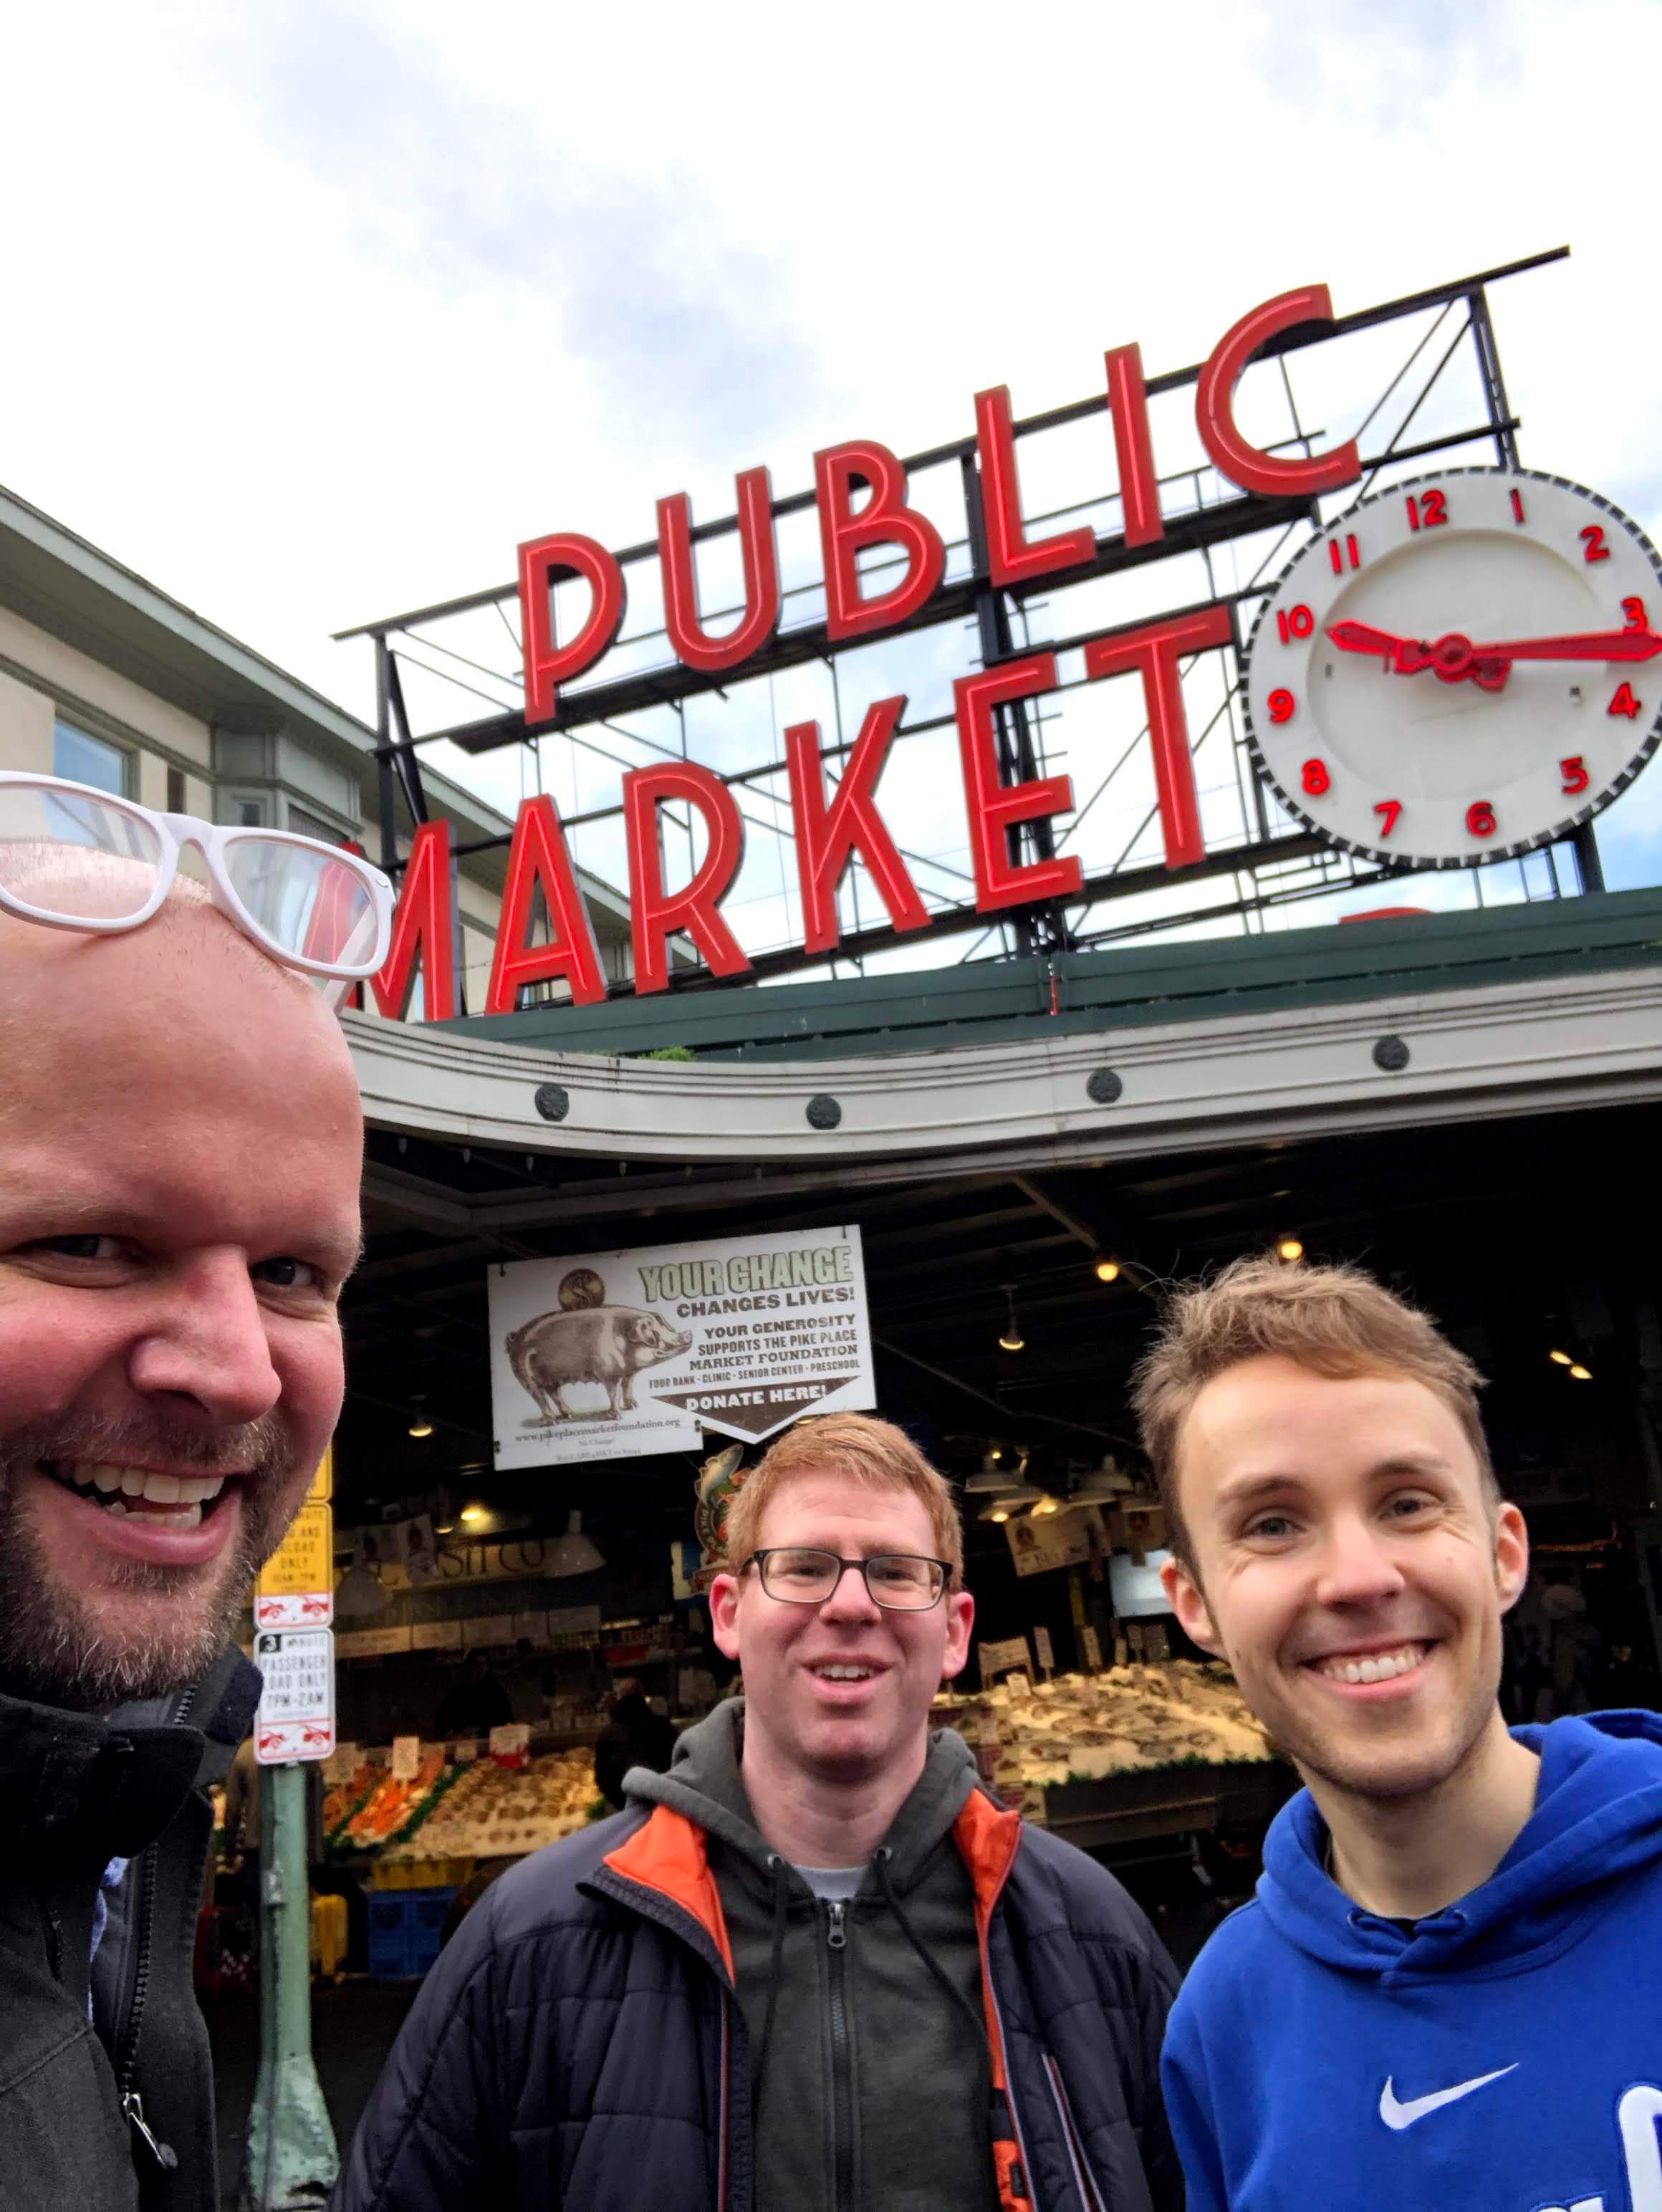 Pike's Place